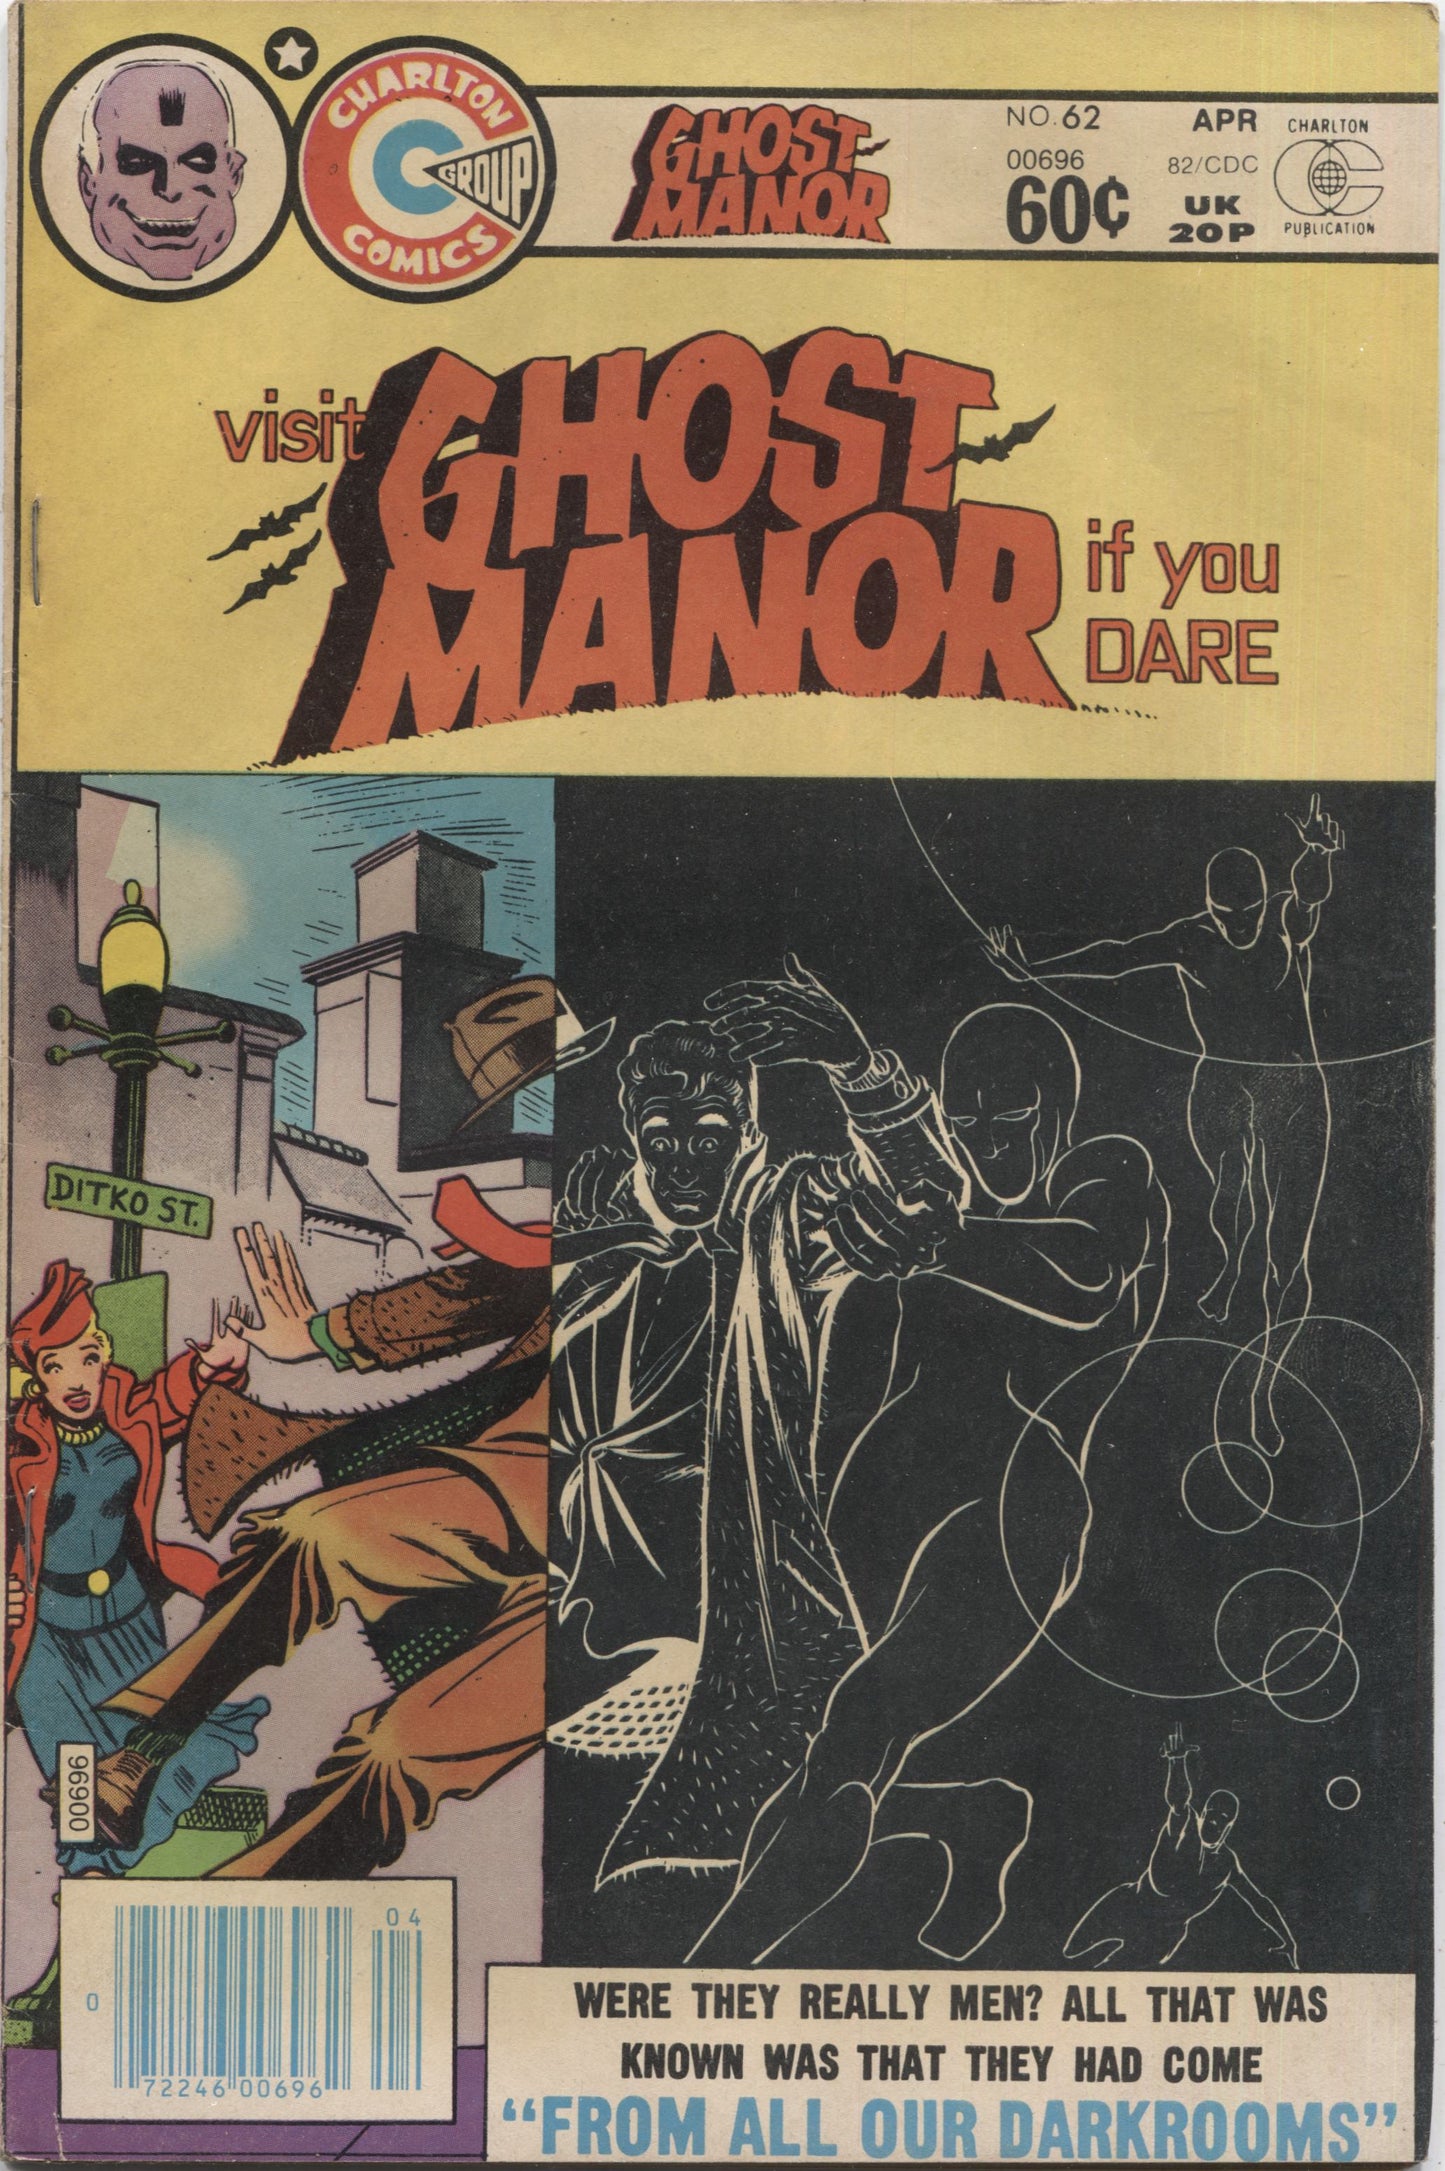 Ghost Manor No. 62, "From All Our Darkrooms," Charlton Comics, April 1982